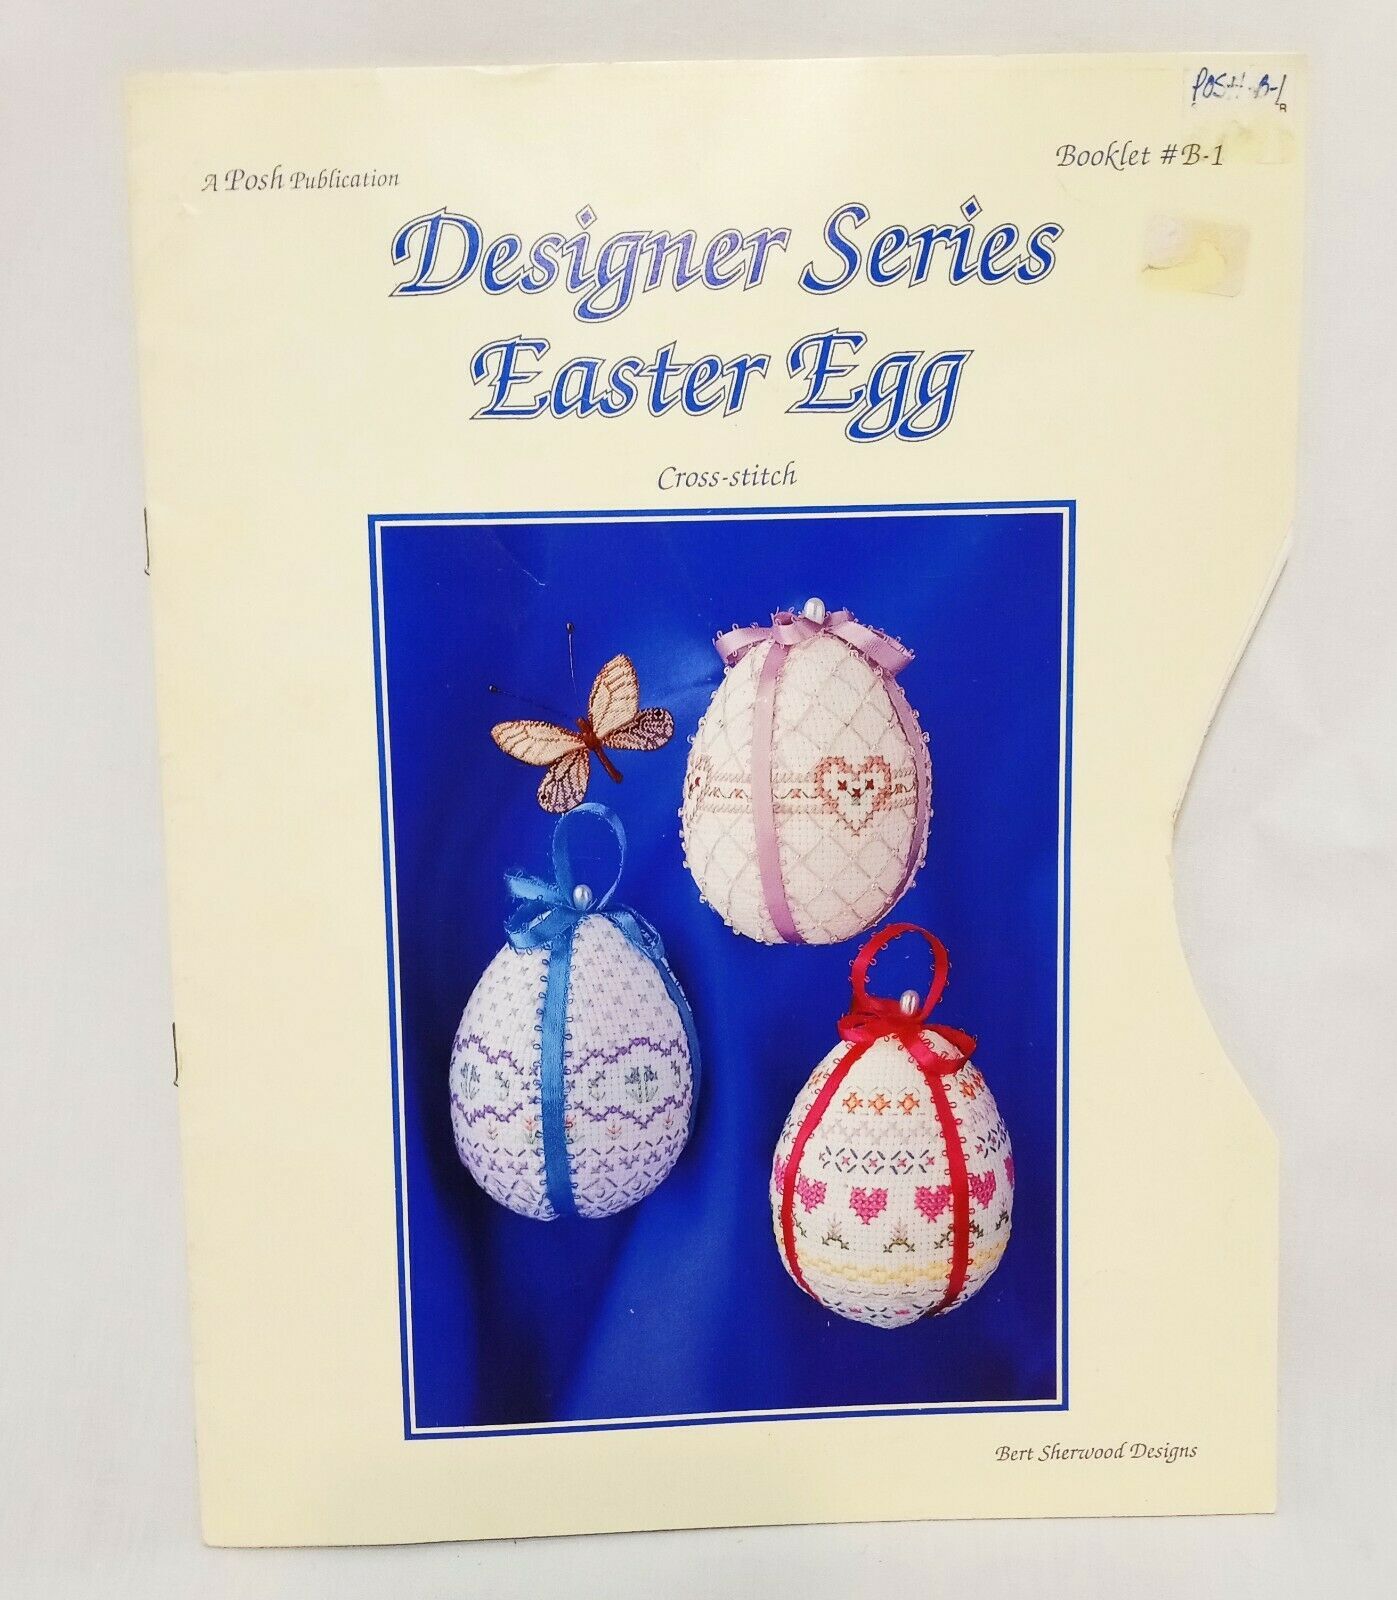 Primary image for Designer Series Easter Egg Counted Cross Stitch Pattern Leaflet Posh Publication